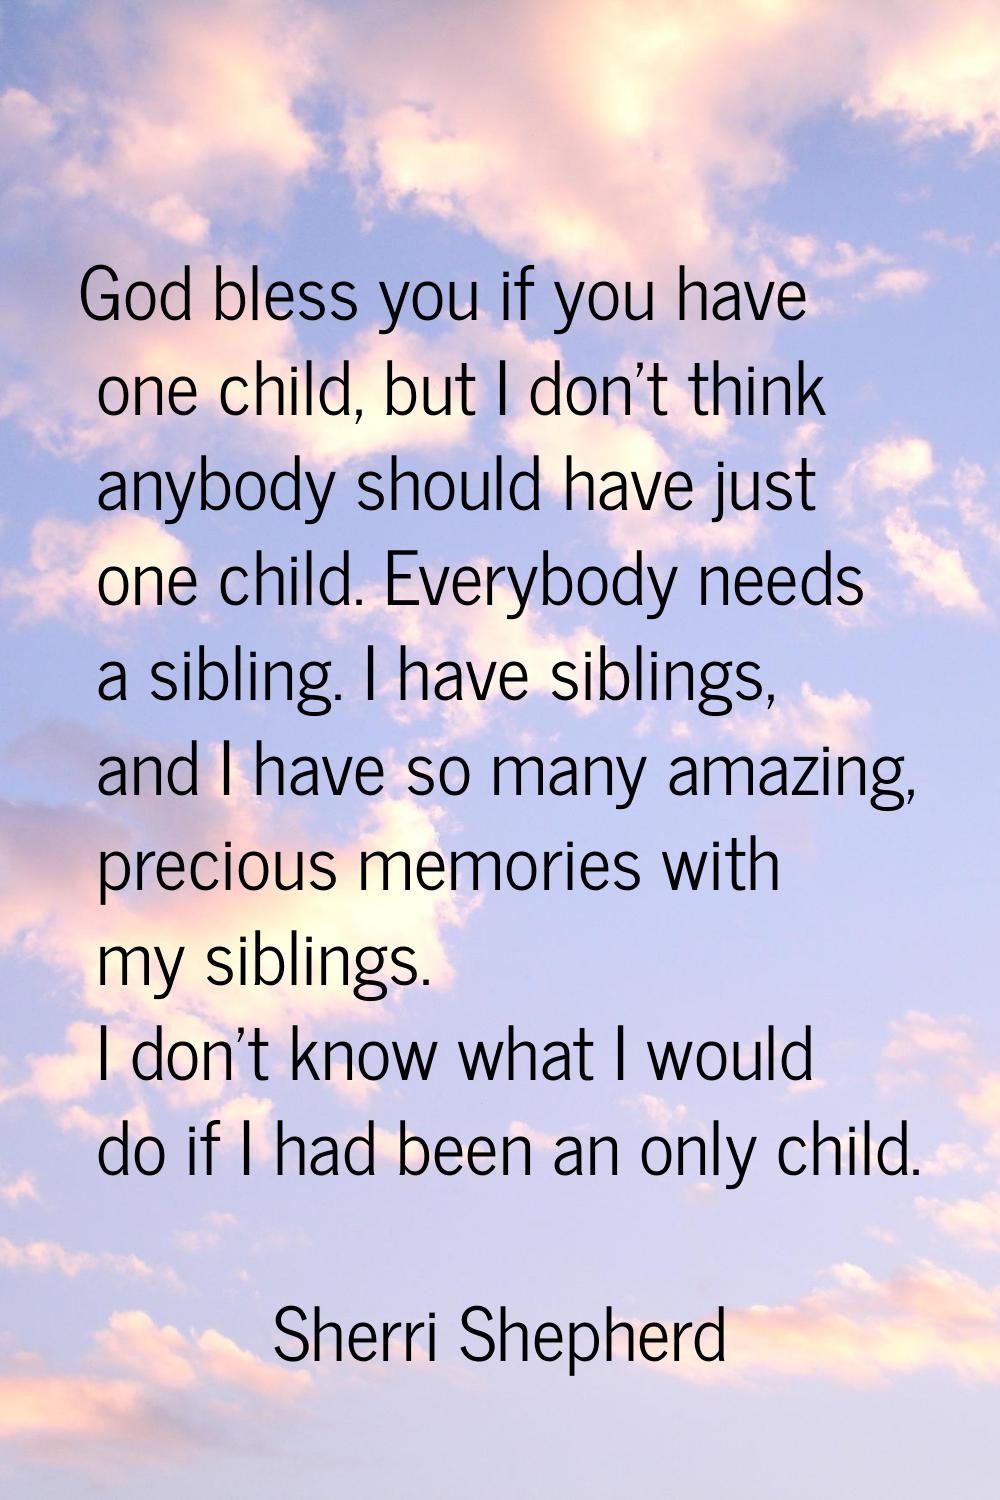 God bless you if you have one child, but I don't think anybody should have just one child. Everybod